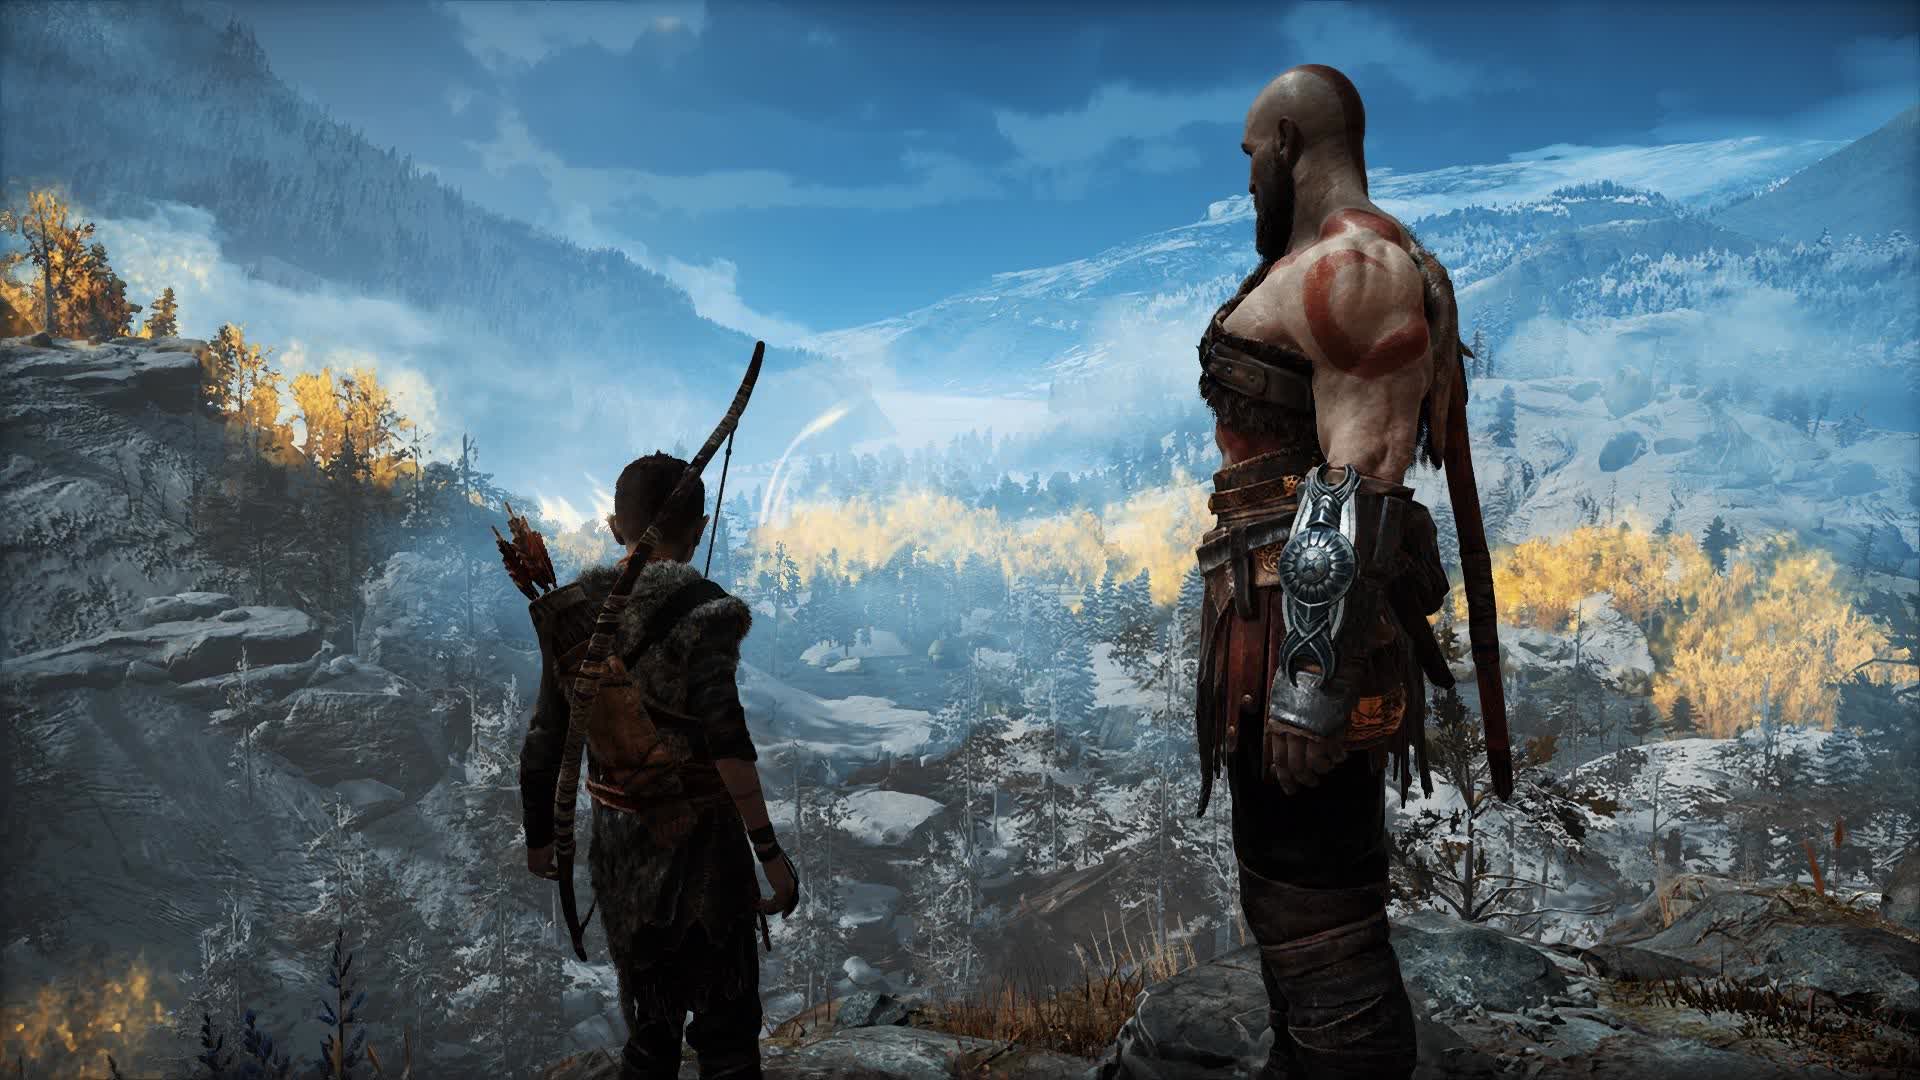 When will God of War Ragnarok come out on PC?